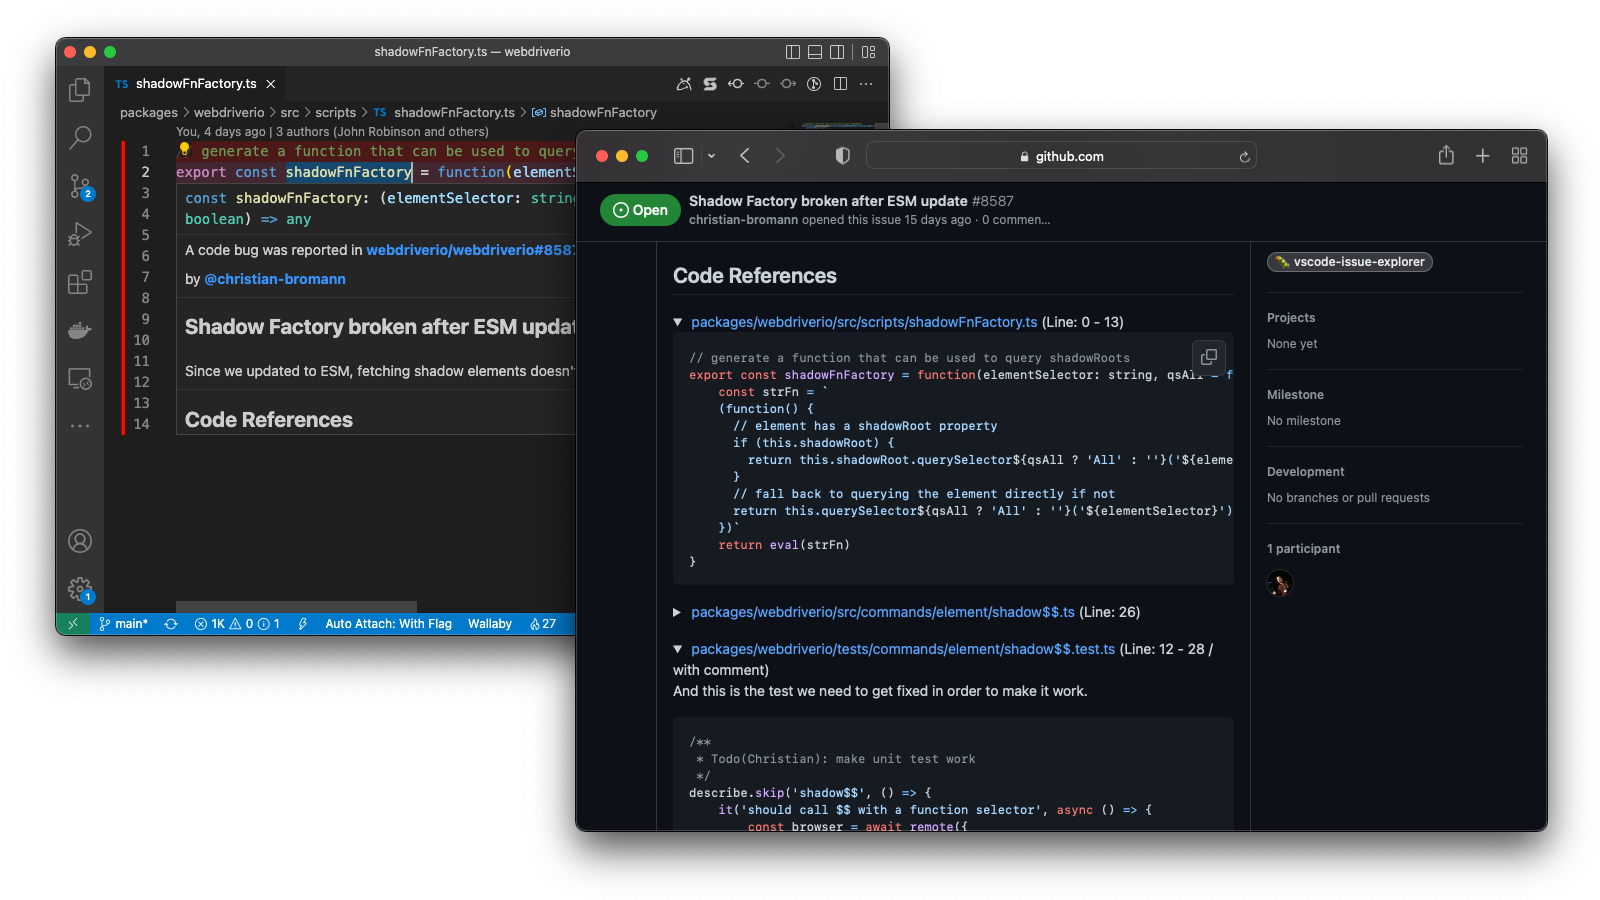 Issue displayed in code and GitHub issues side-by-side